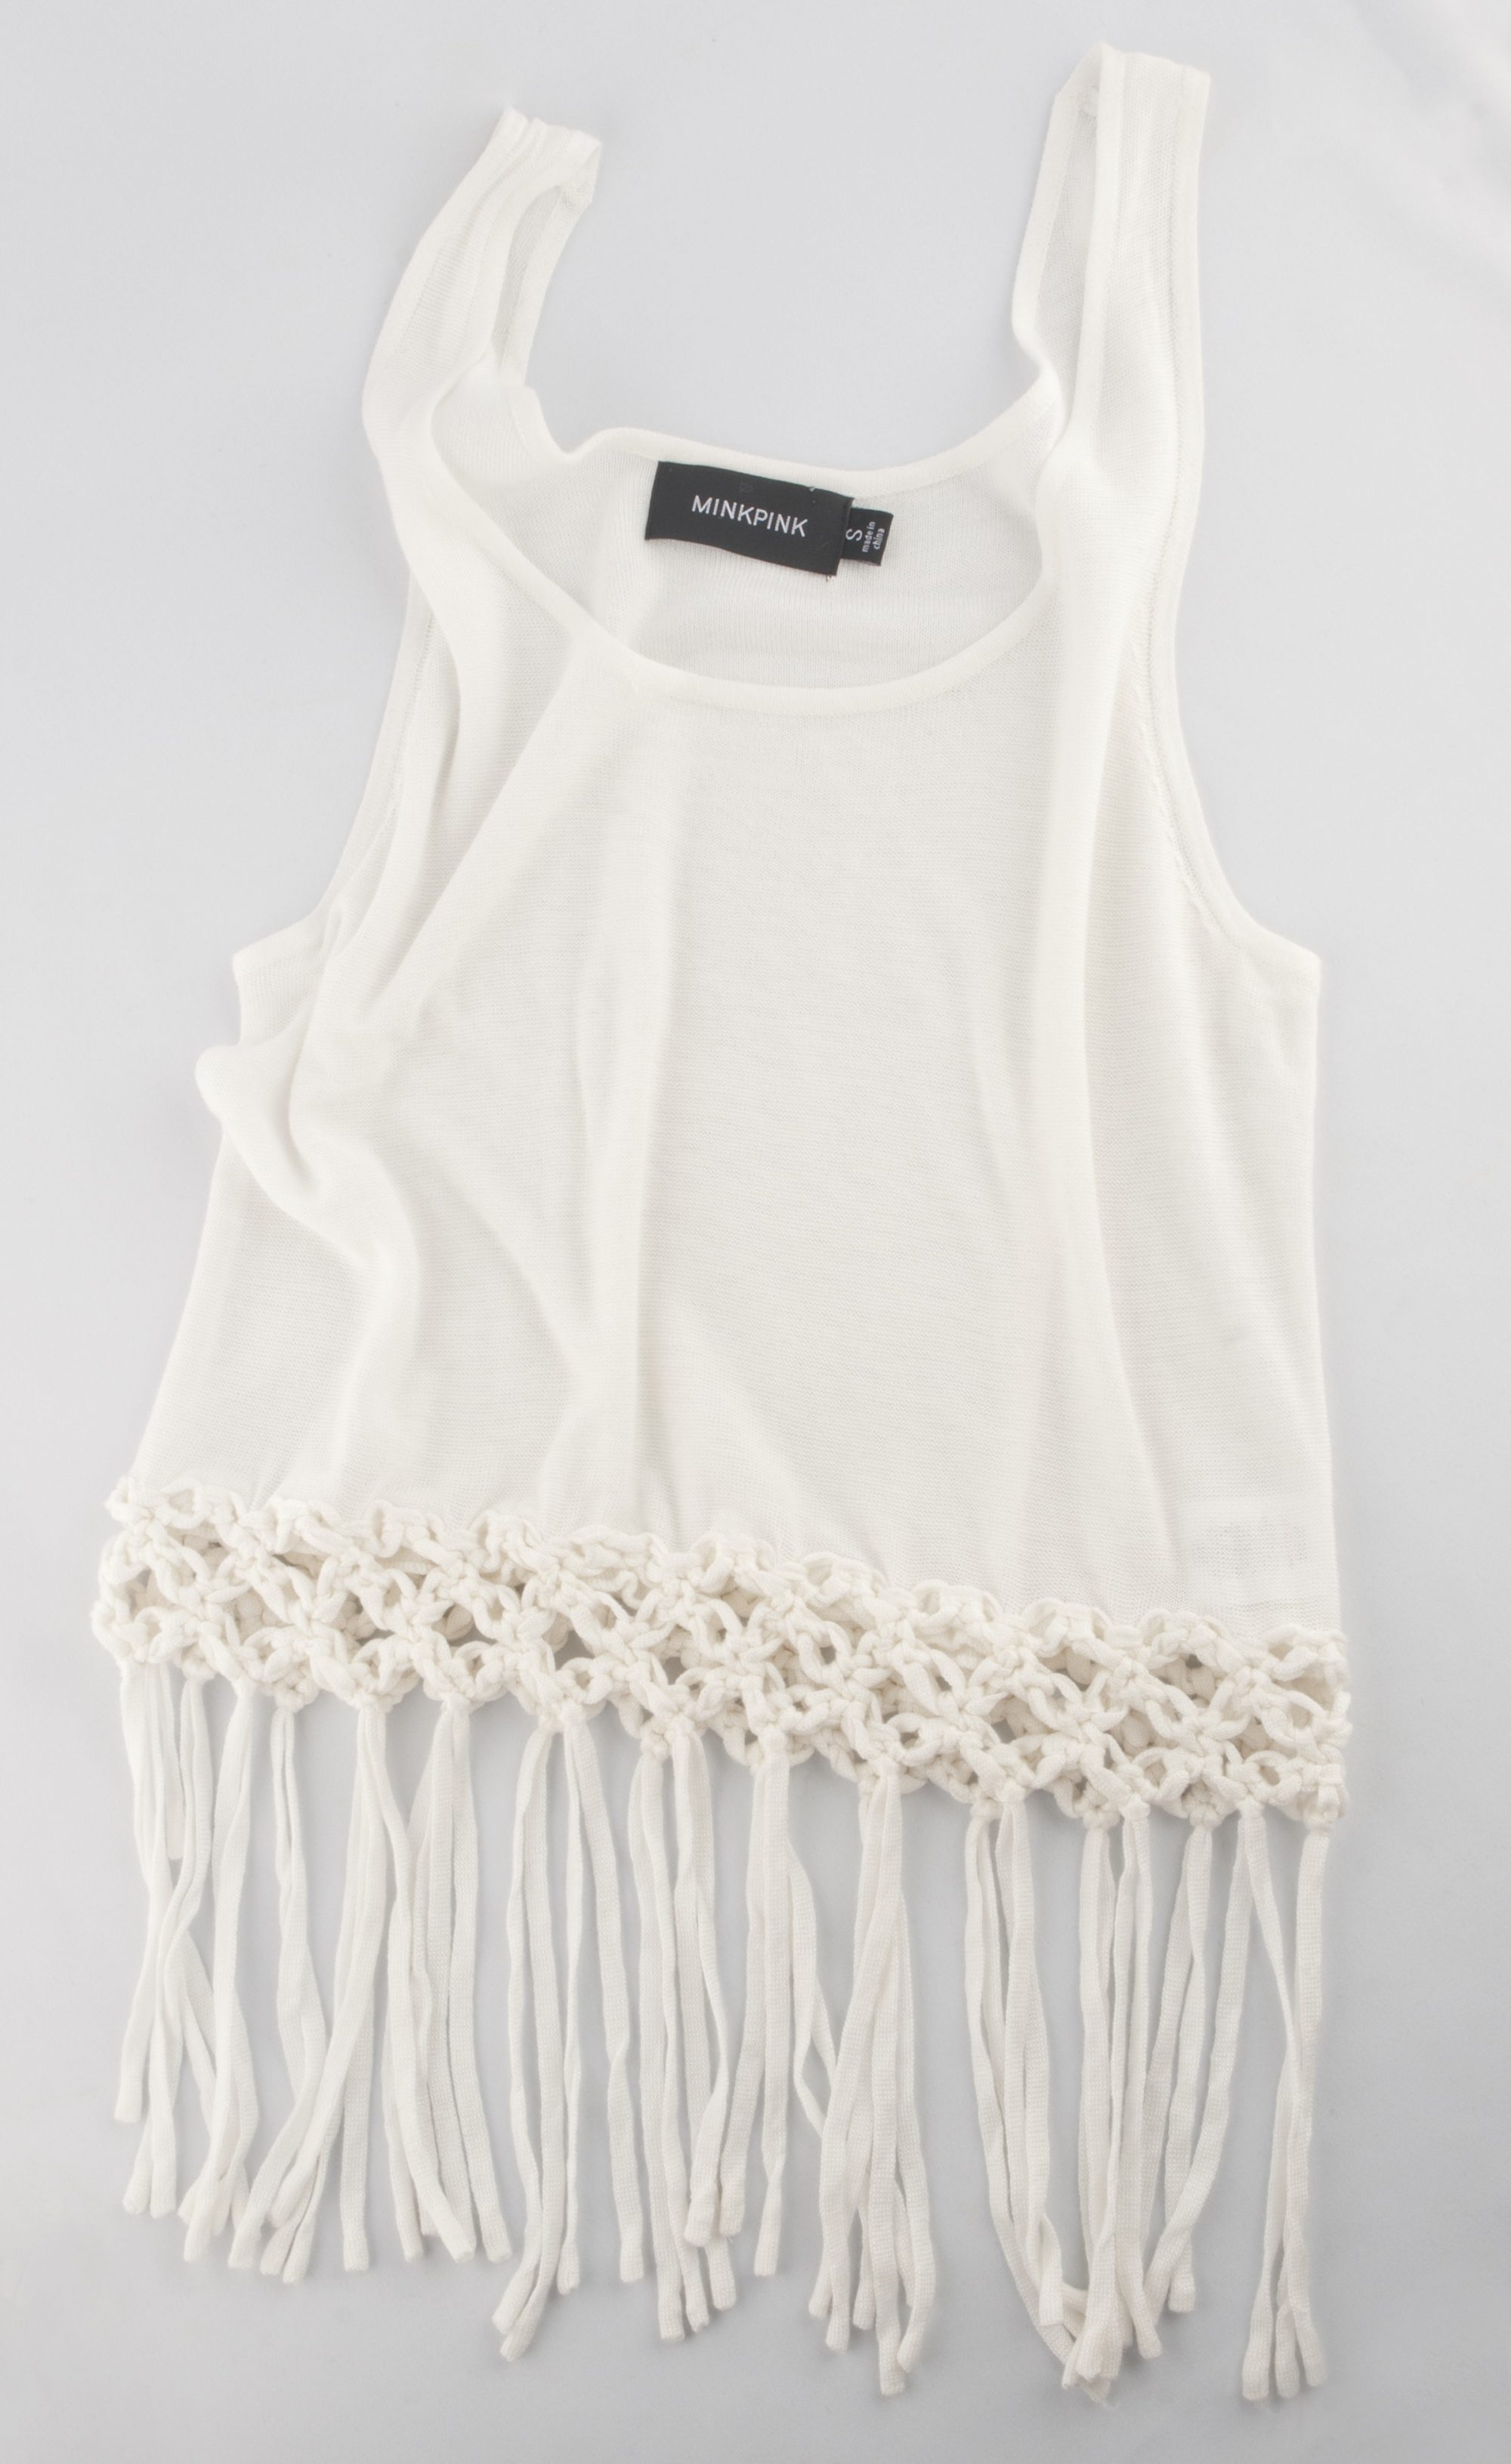 Mink Pinkfringe tank, $65, from Shades of Grey Boutique.